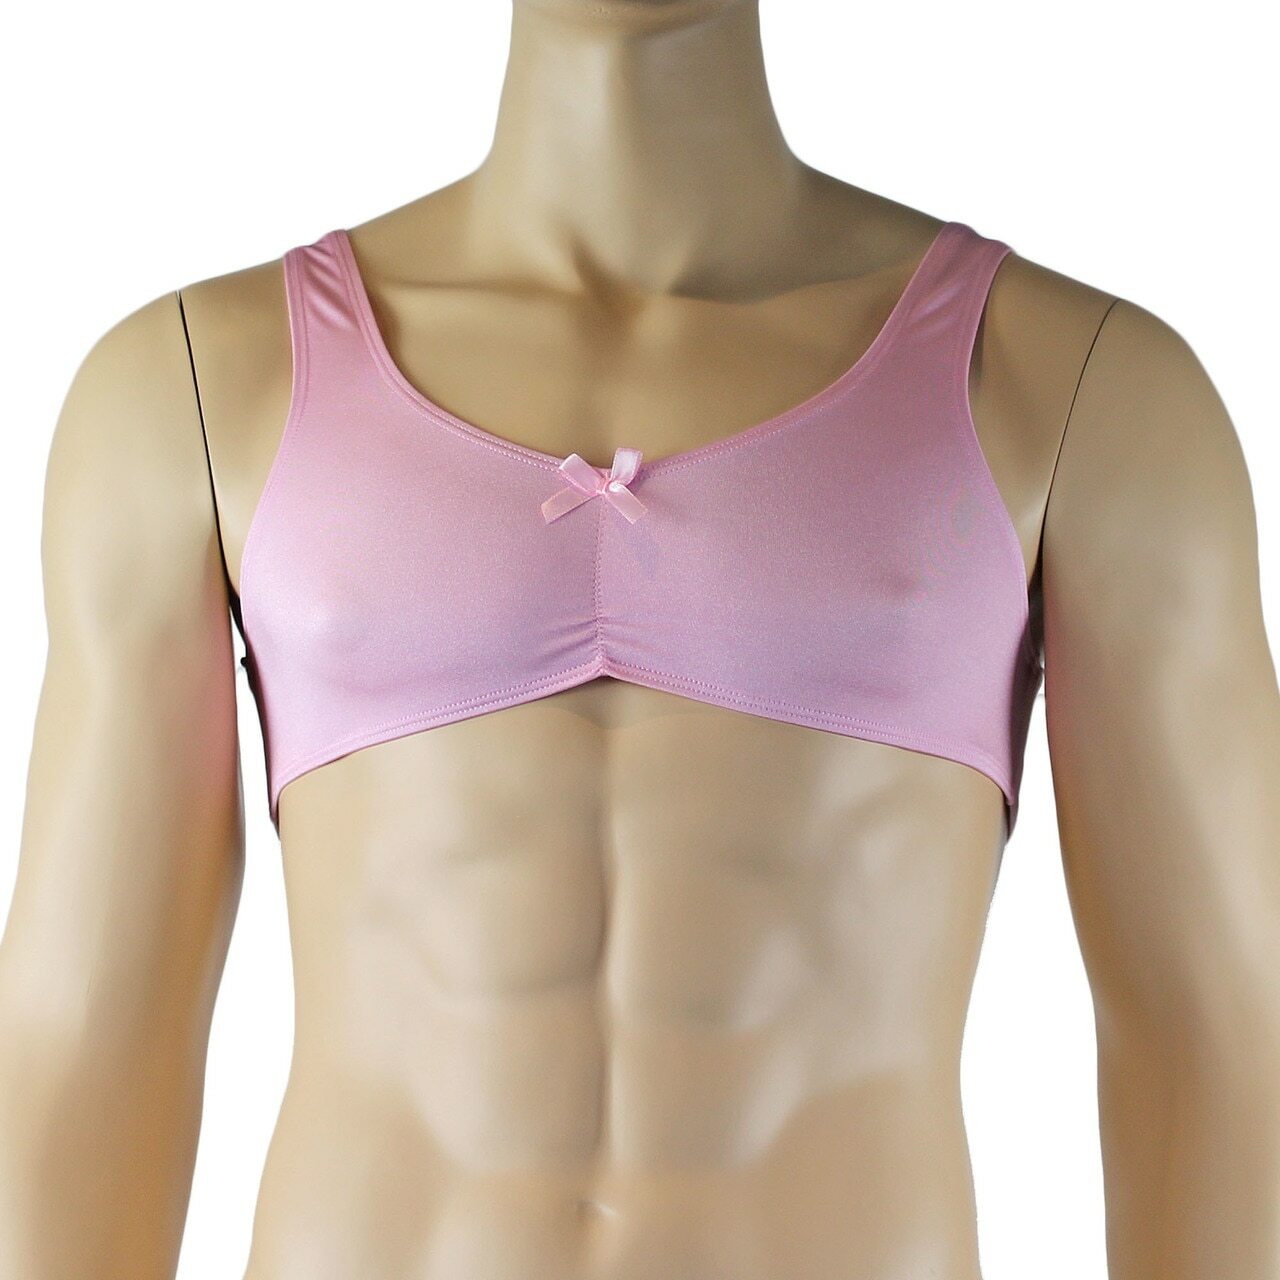 Male Angel Stretch Spandex Bra Top & Matching Thong with Bow Pink